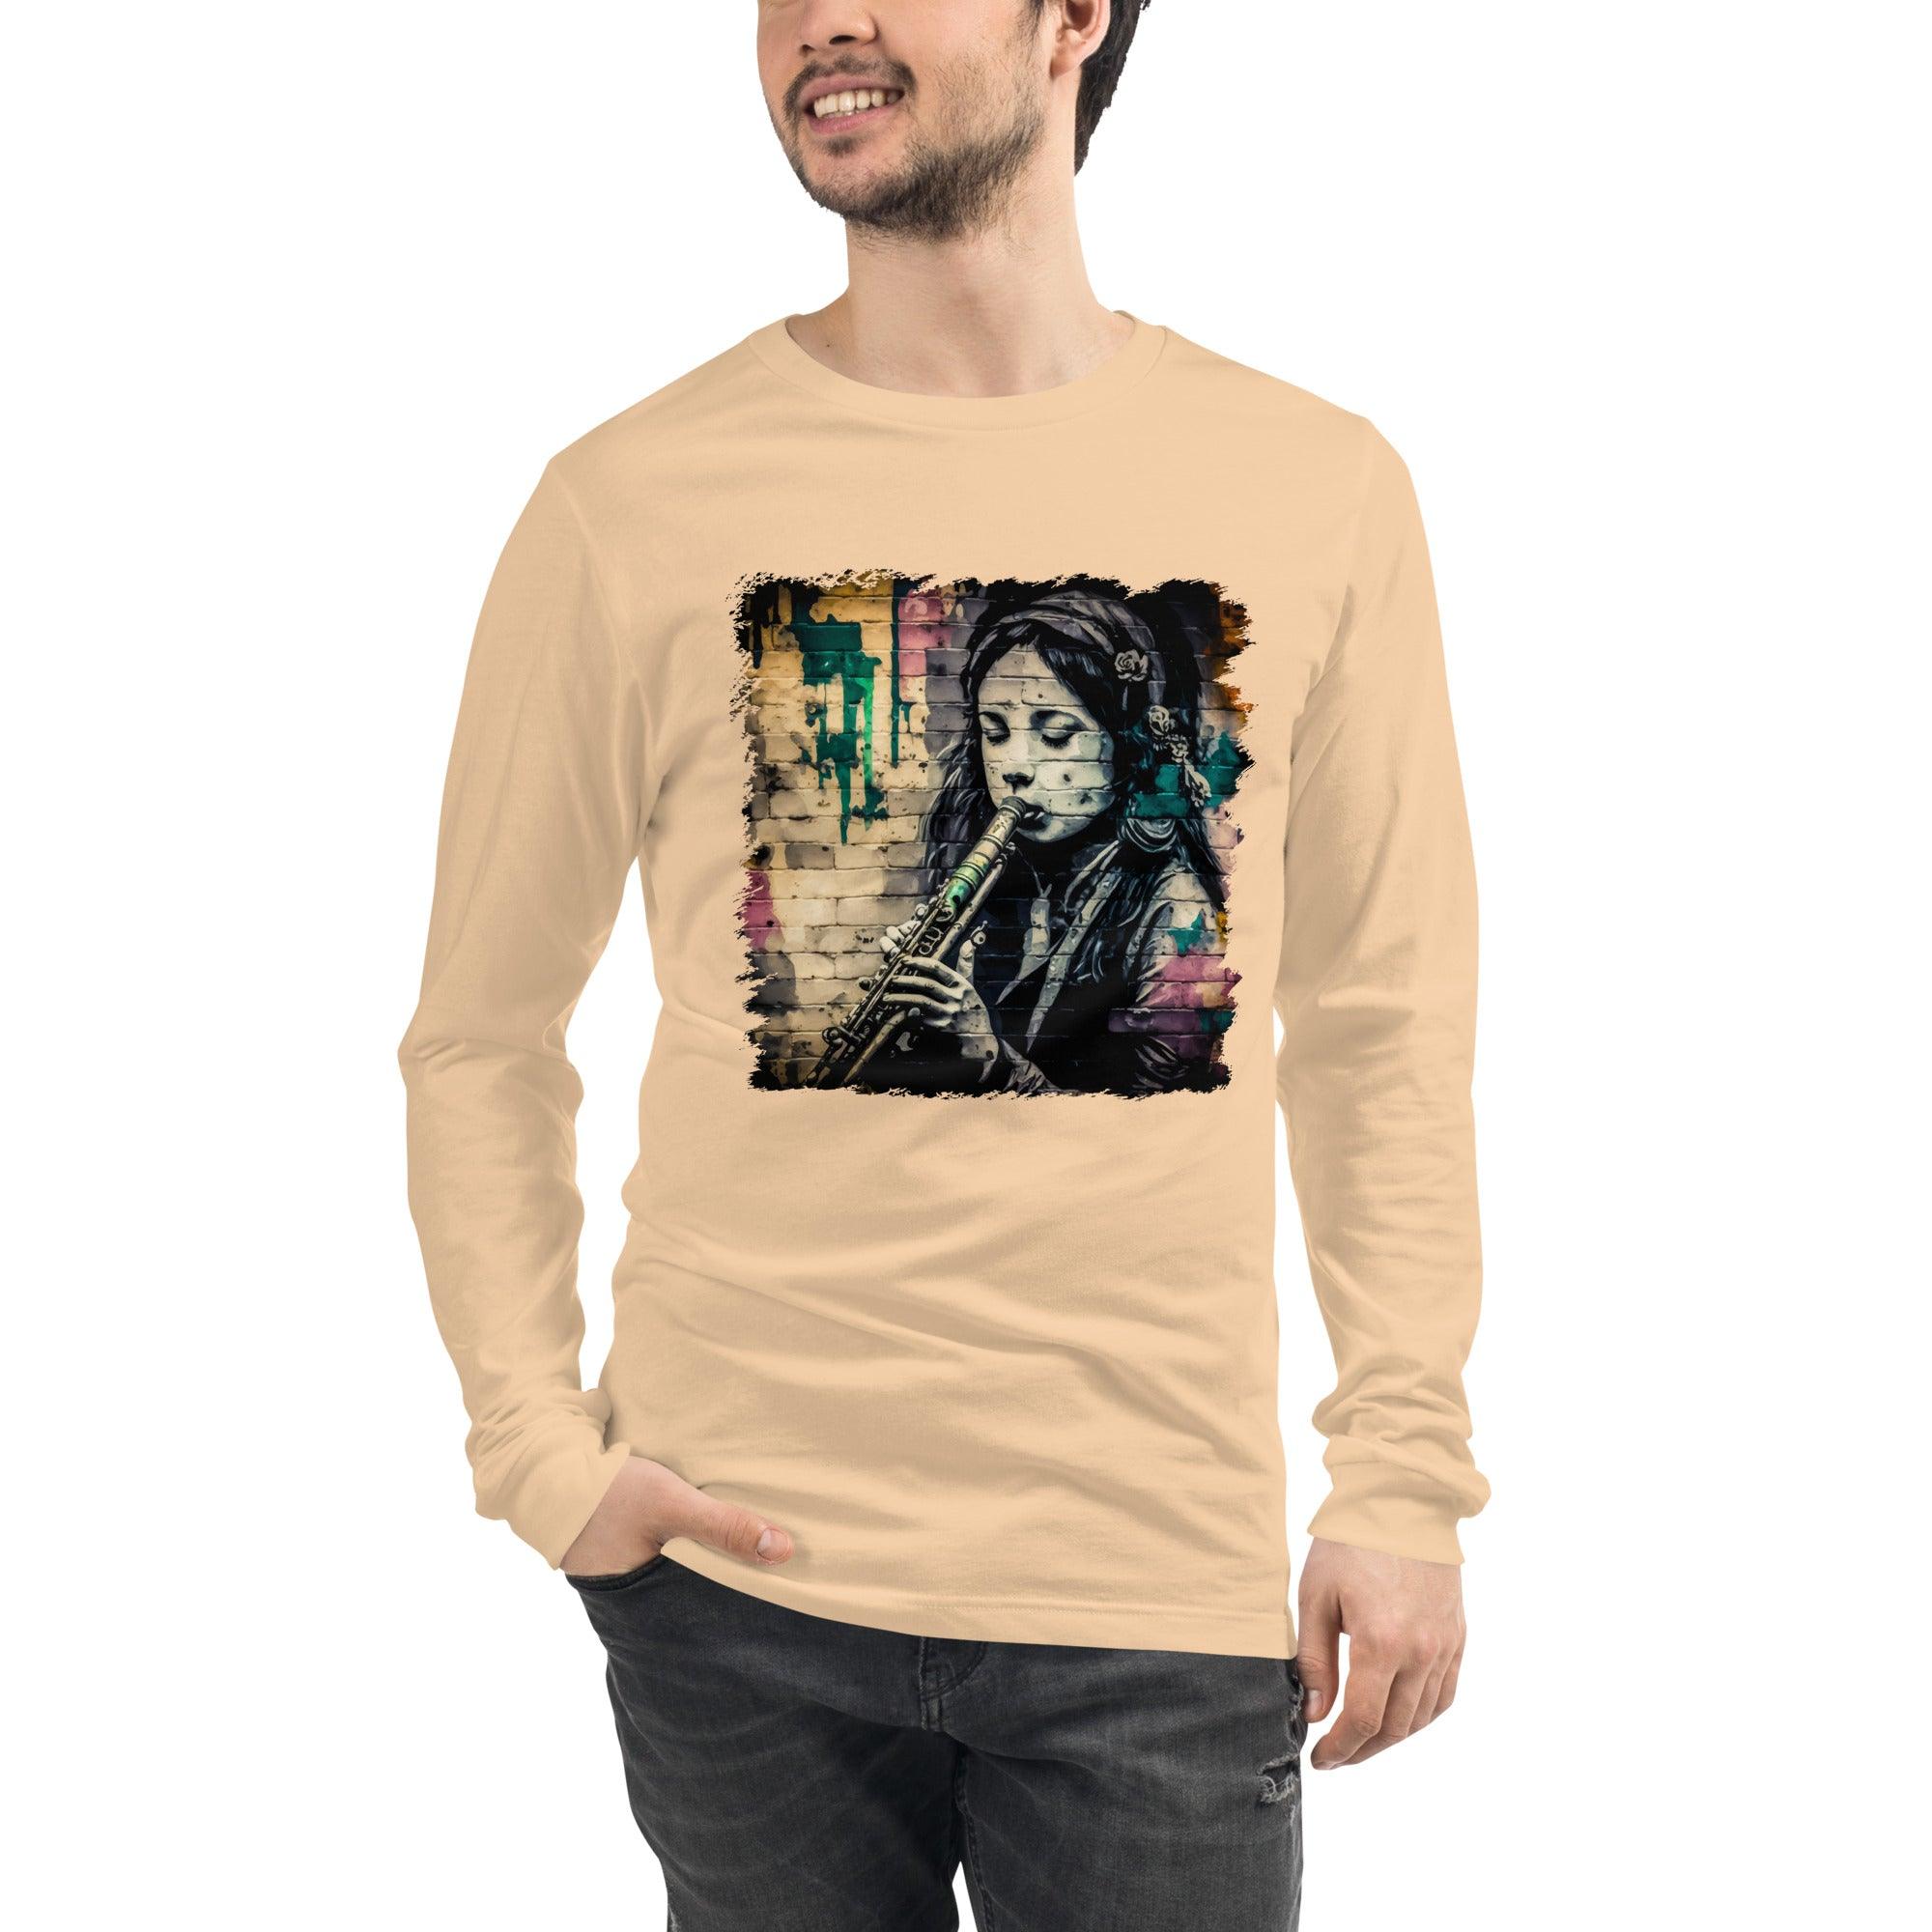 Breathing Life Into Music Unisex Long Sleeve Tee - Beyond T-shirts